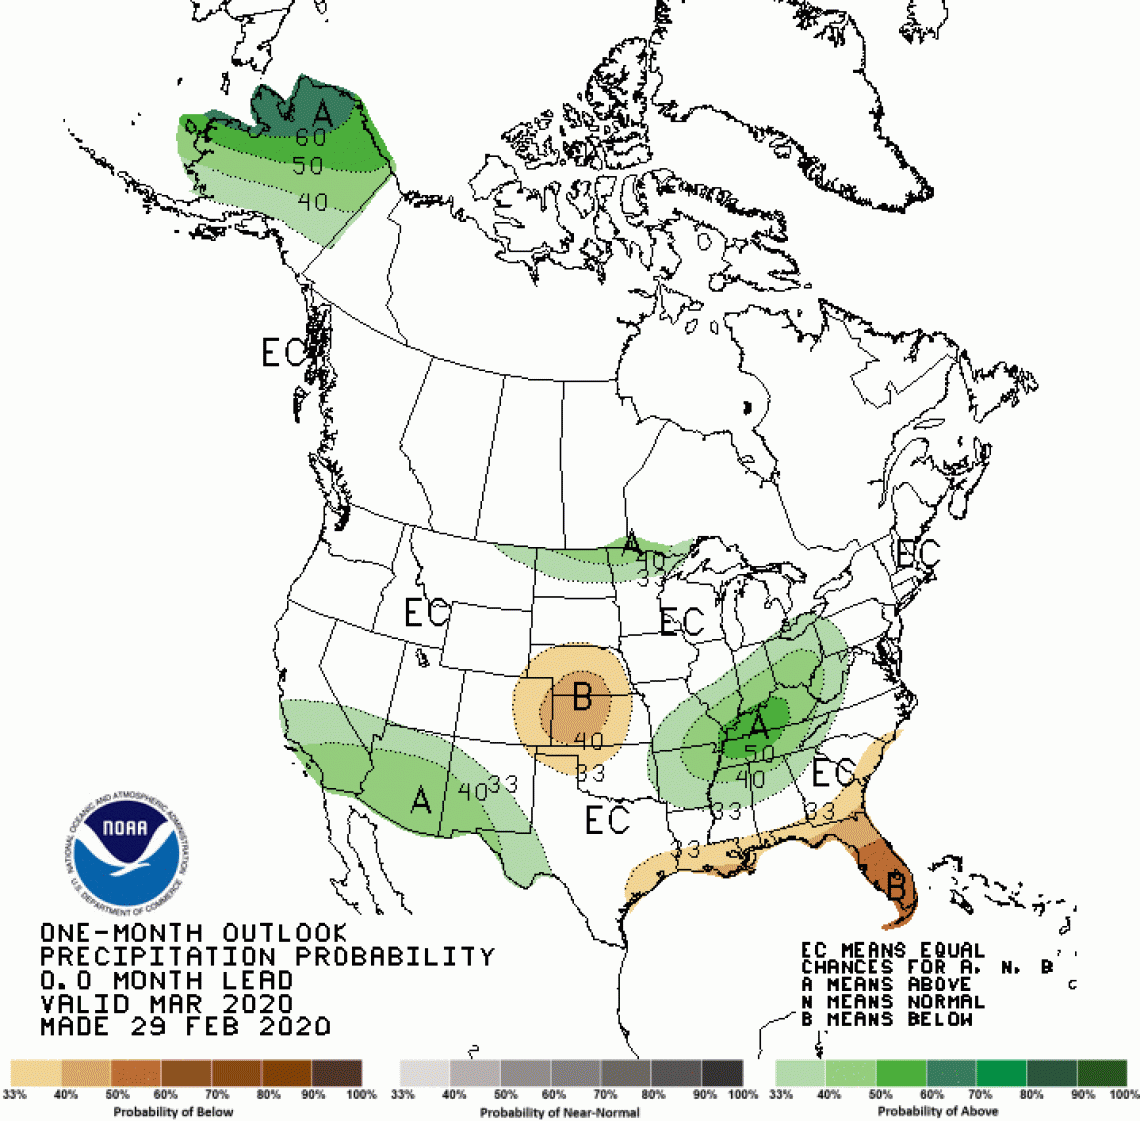 2020 March precipitation outlook map